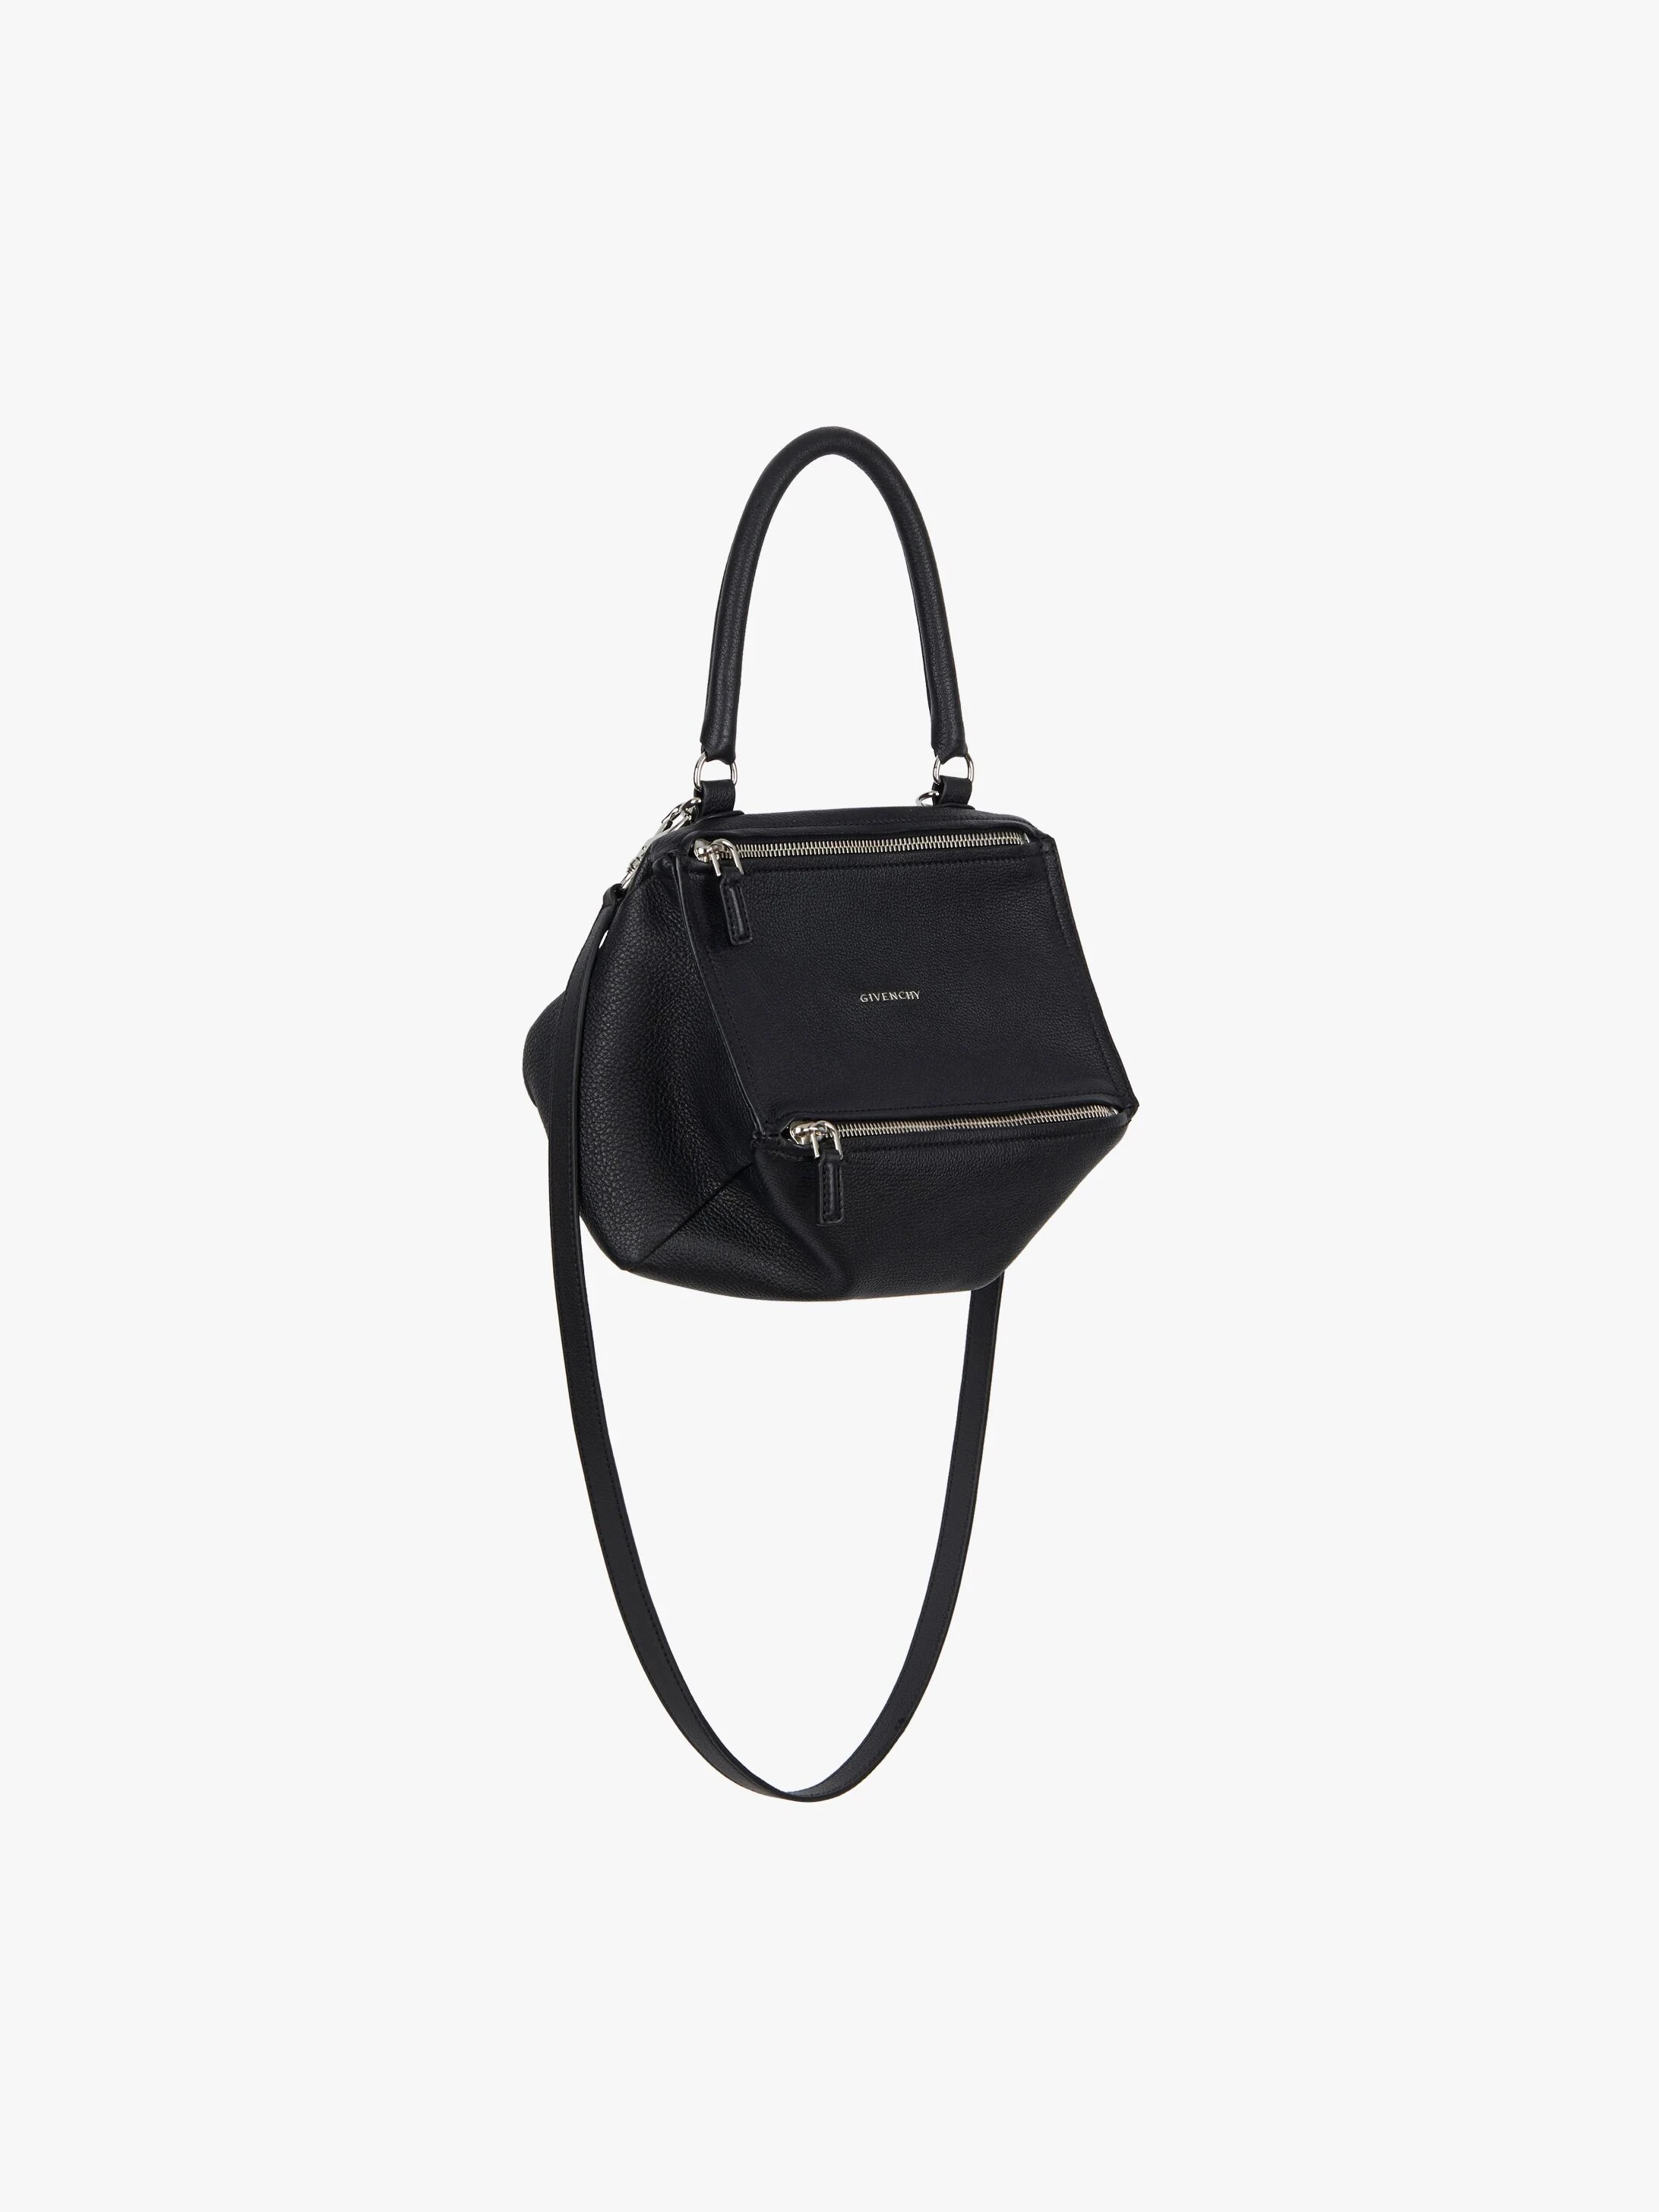 SMALL PANDORA BAG IN GRAINED LEATHER - 3